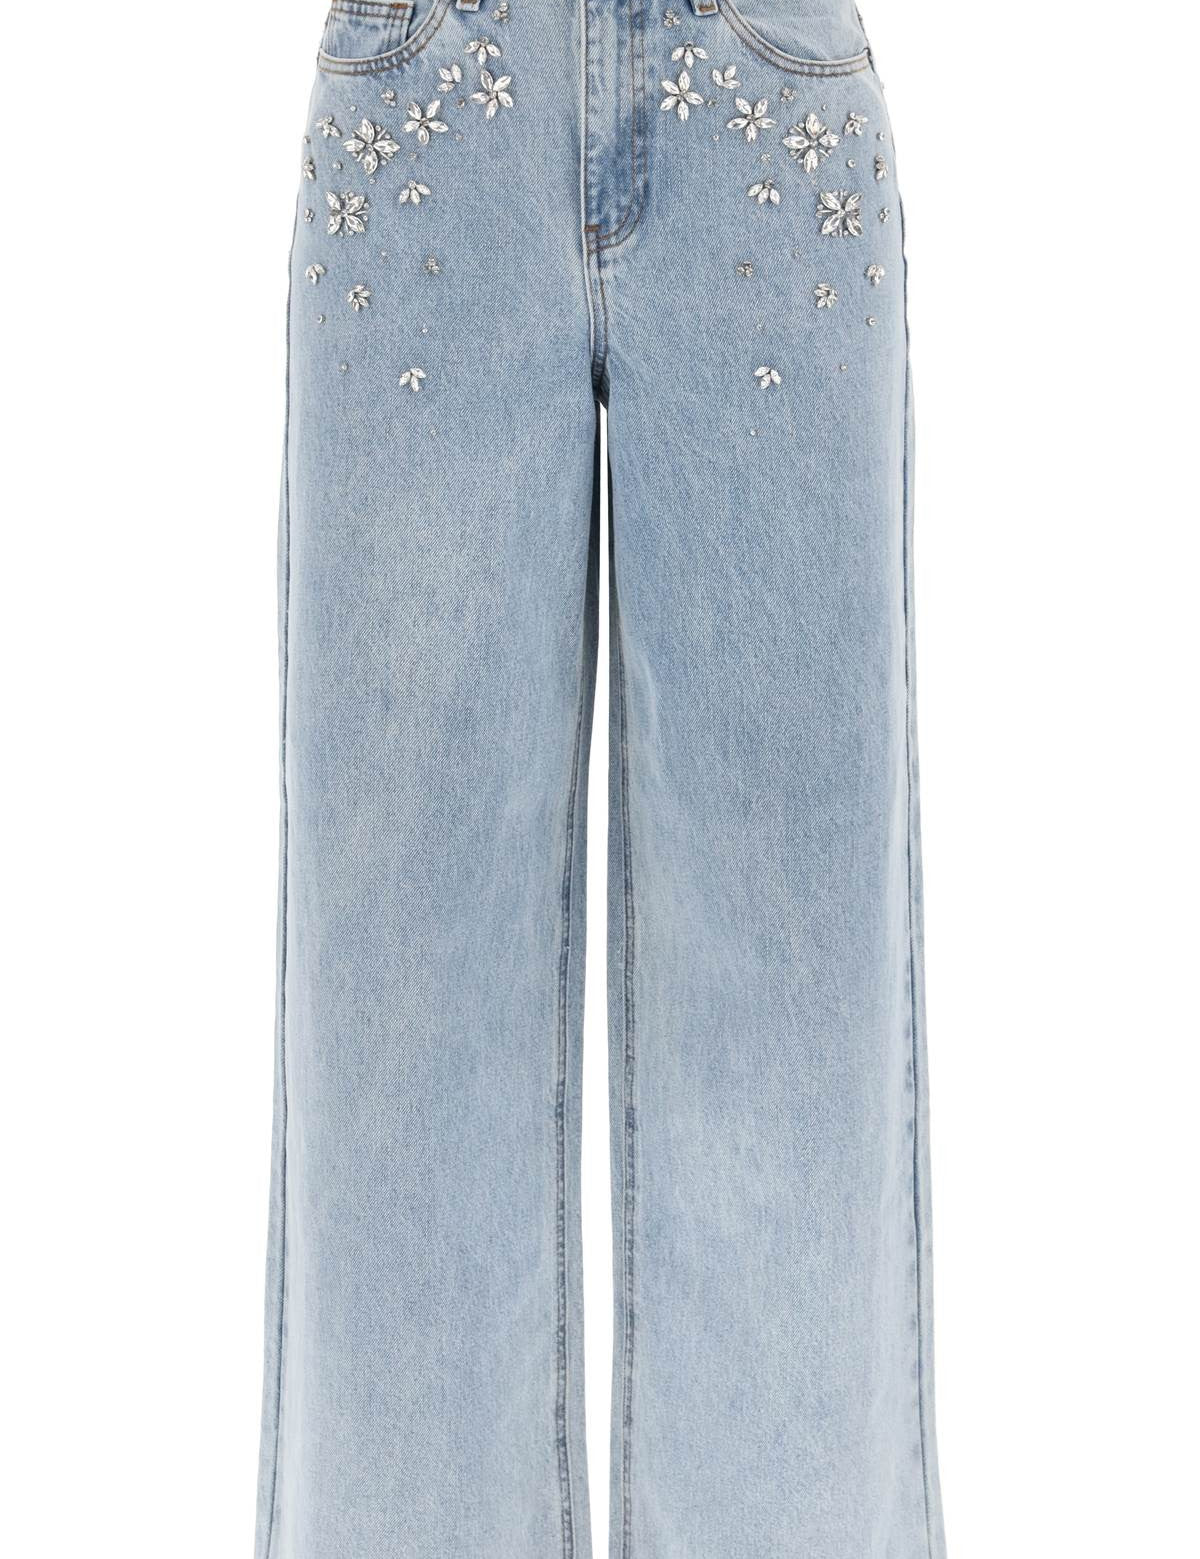 wide-jeans-with-applique-details.jpg